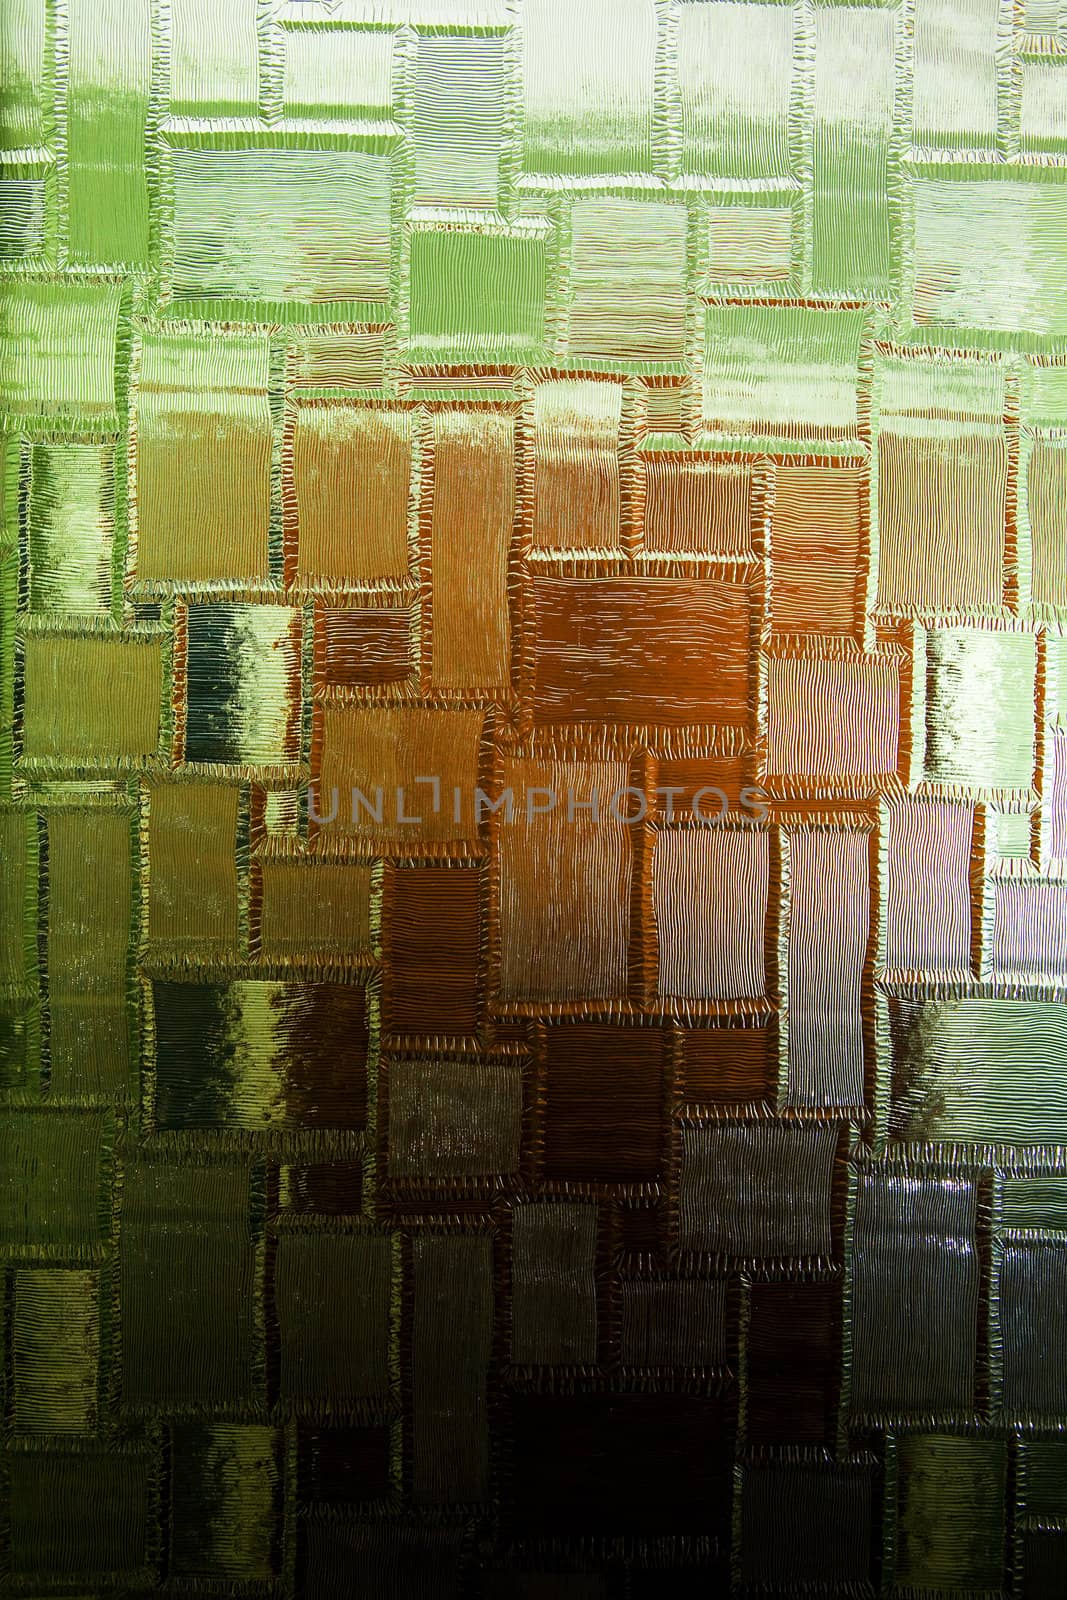 Glass window texture - a hatched pattern